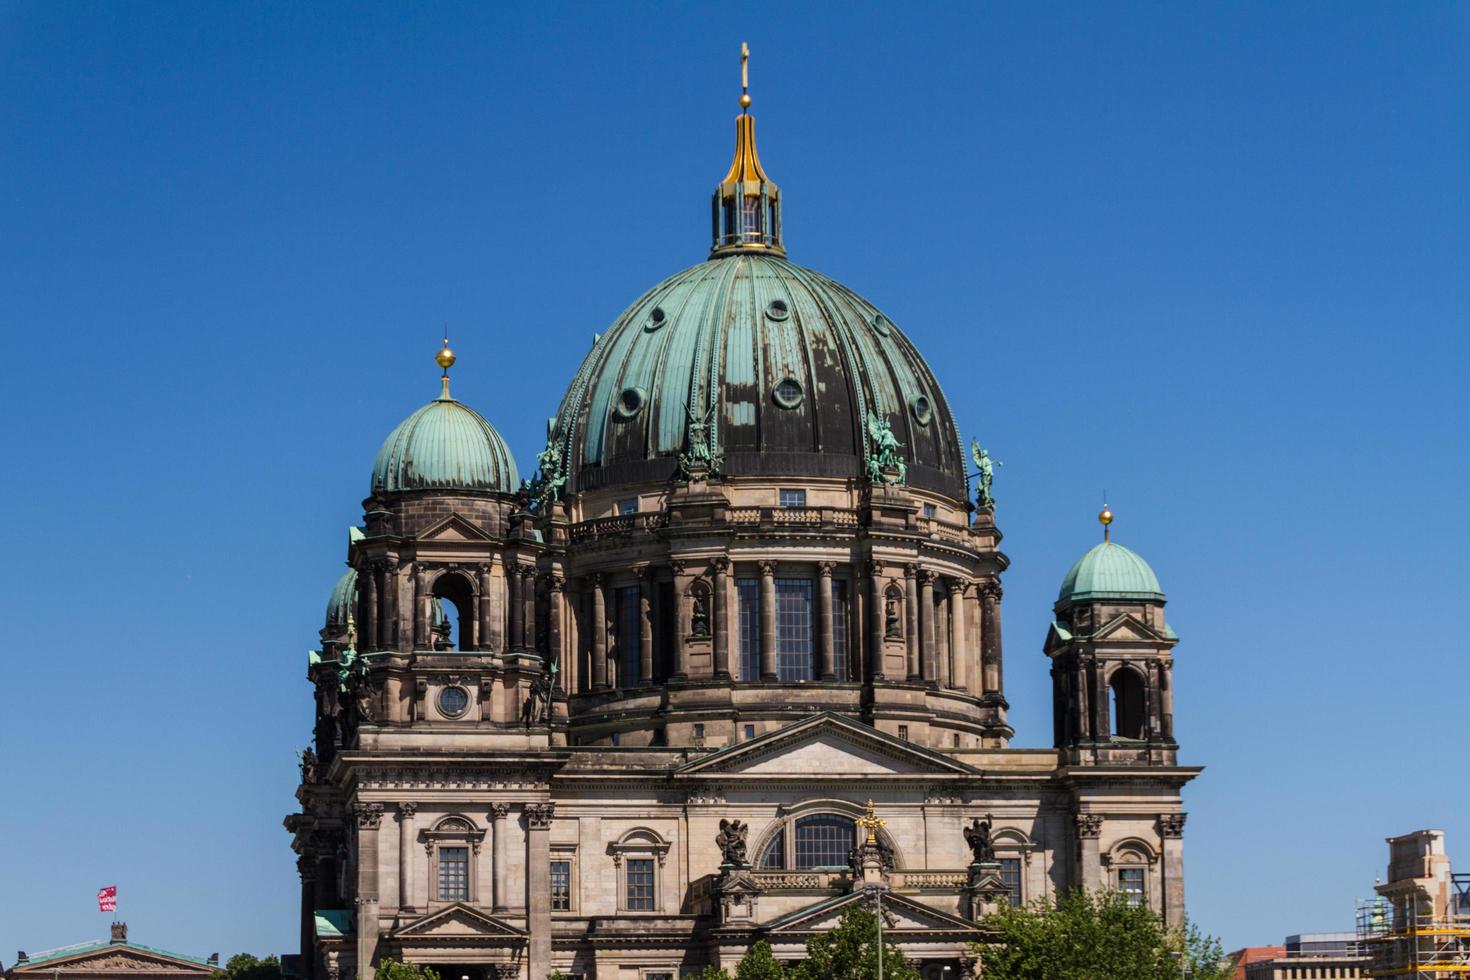 Berlin Cathedral Berliner Dom photo